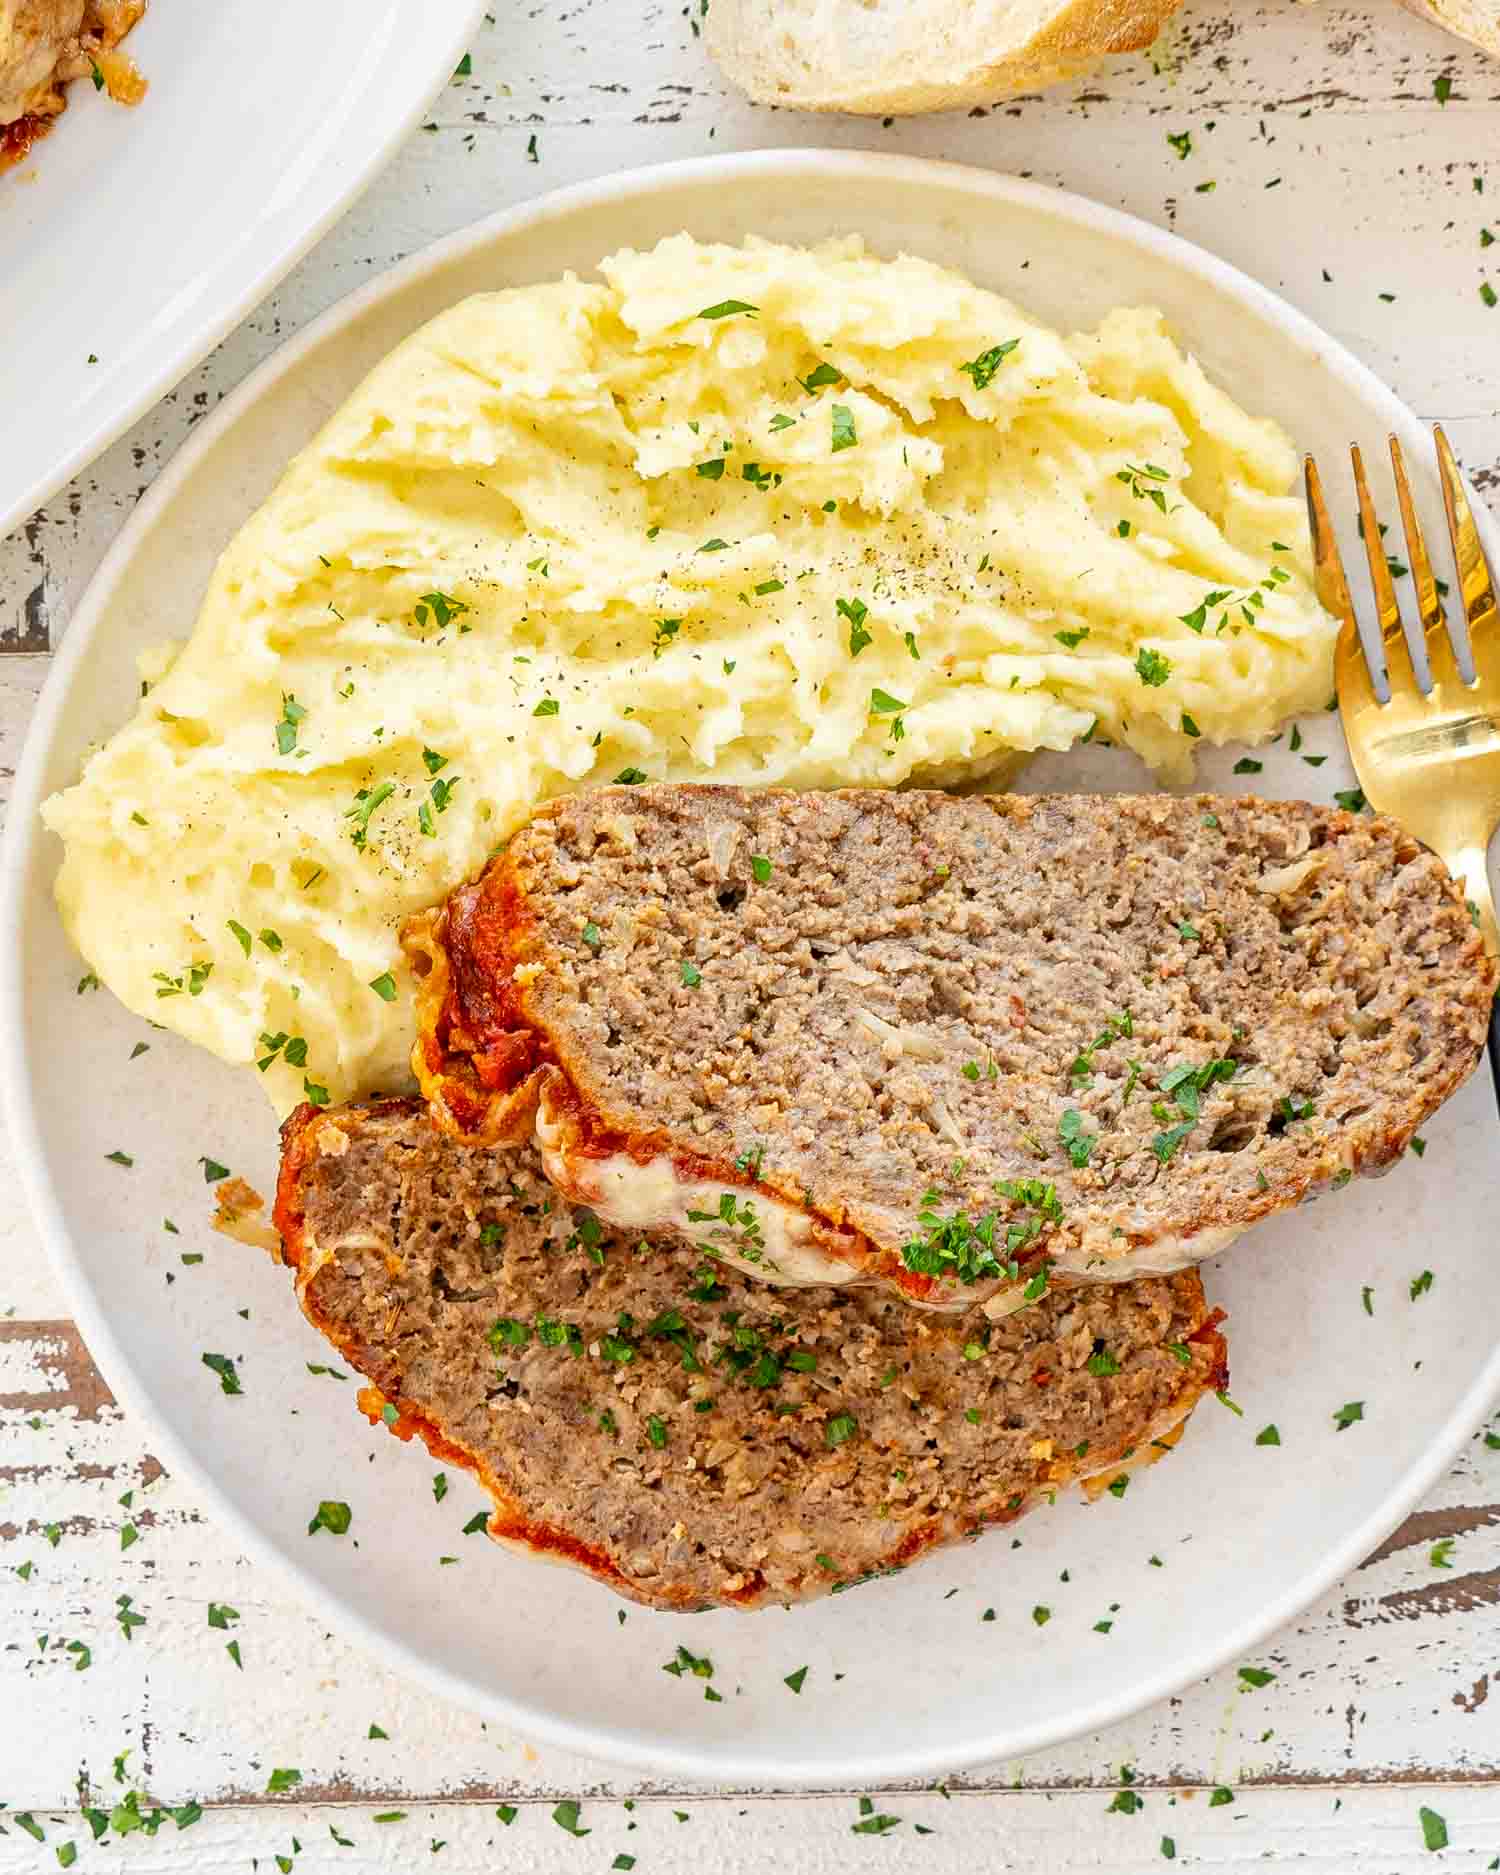 2 slices of italian meatloaf along some fluffy mashed potatoes garnished with fresh parsley on a white plate.